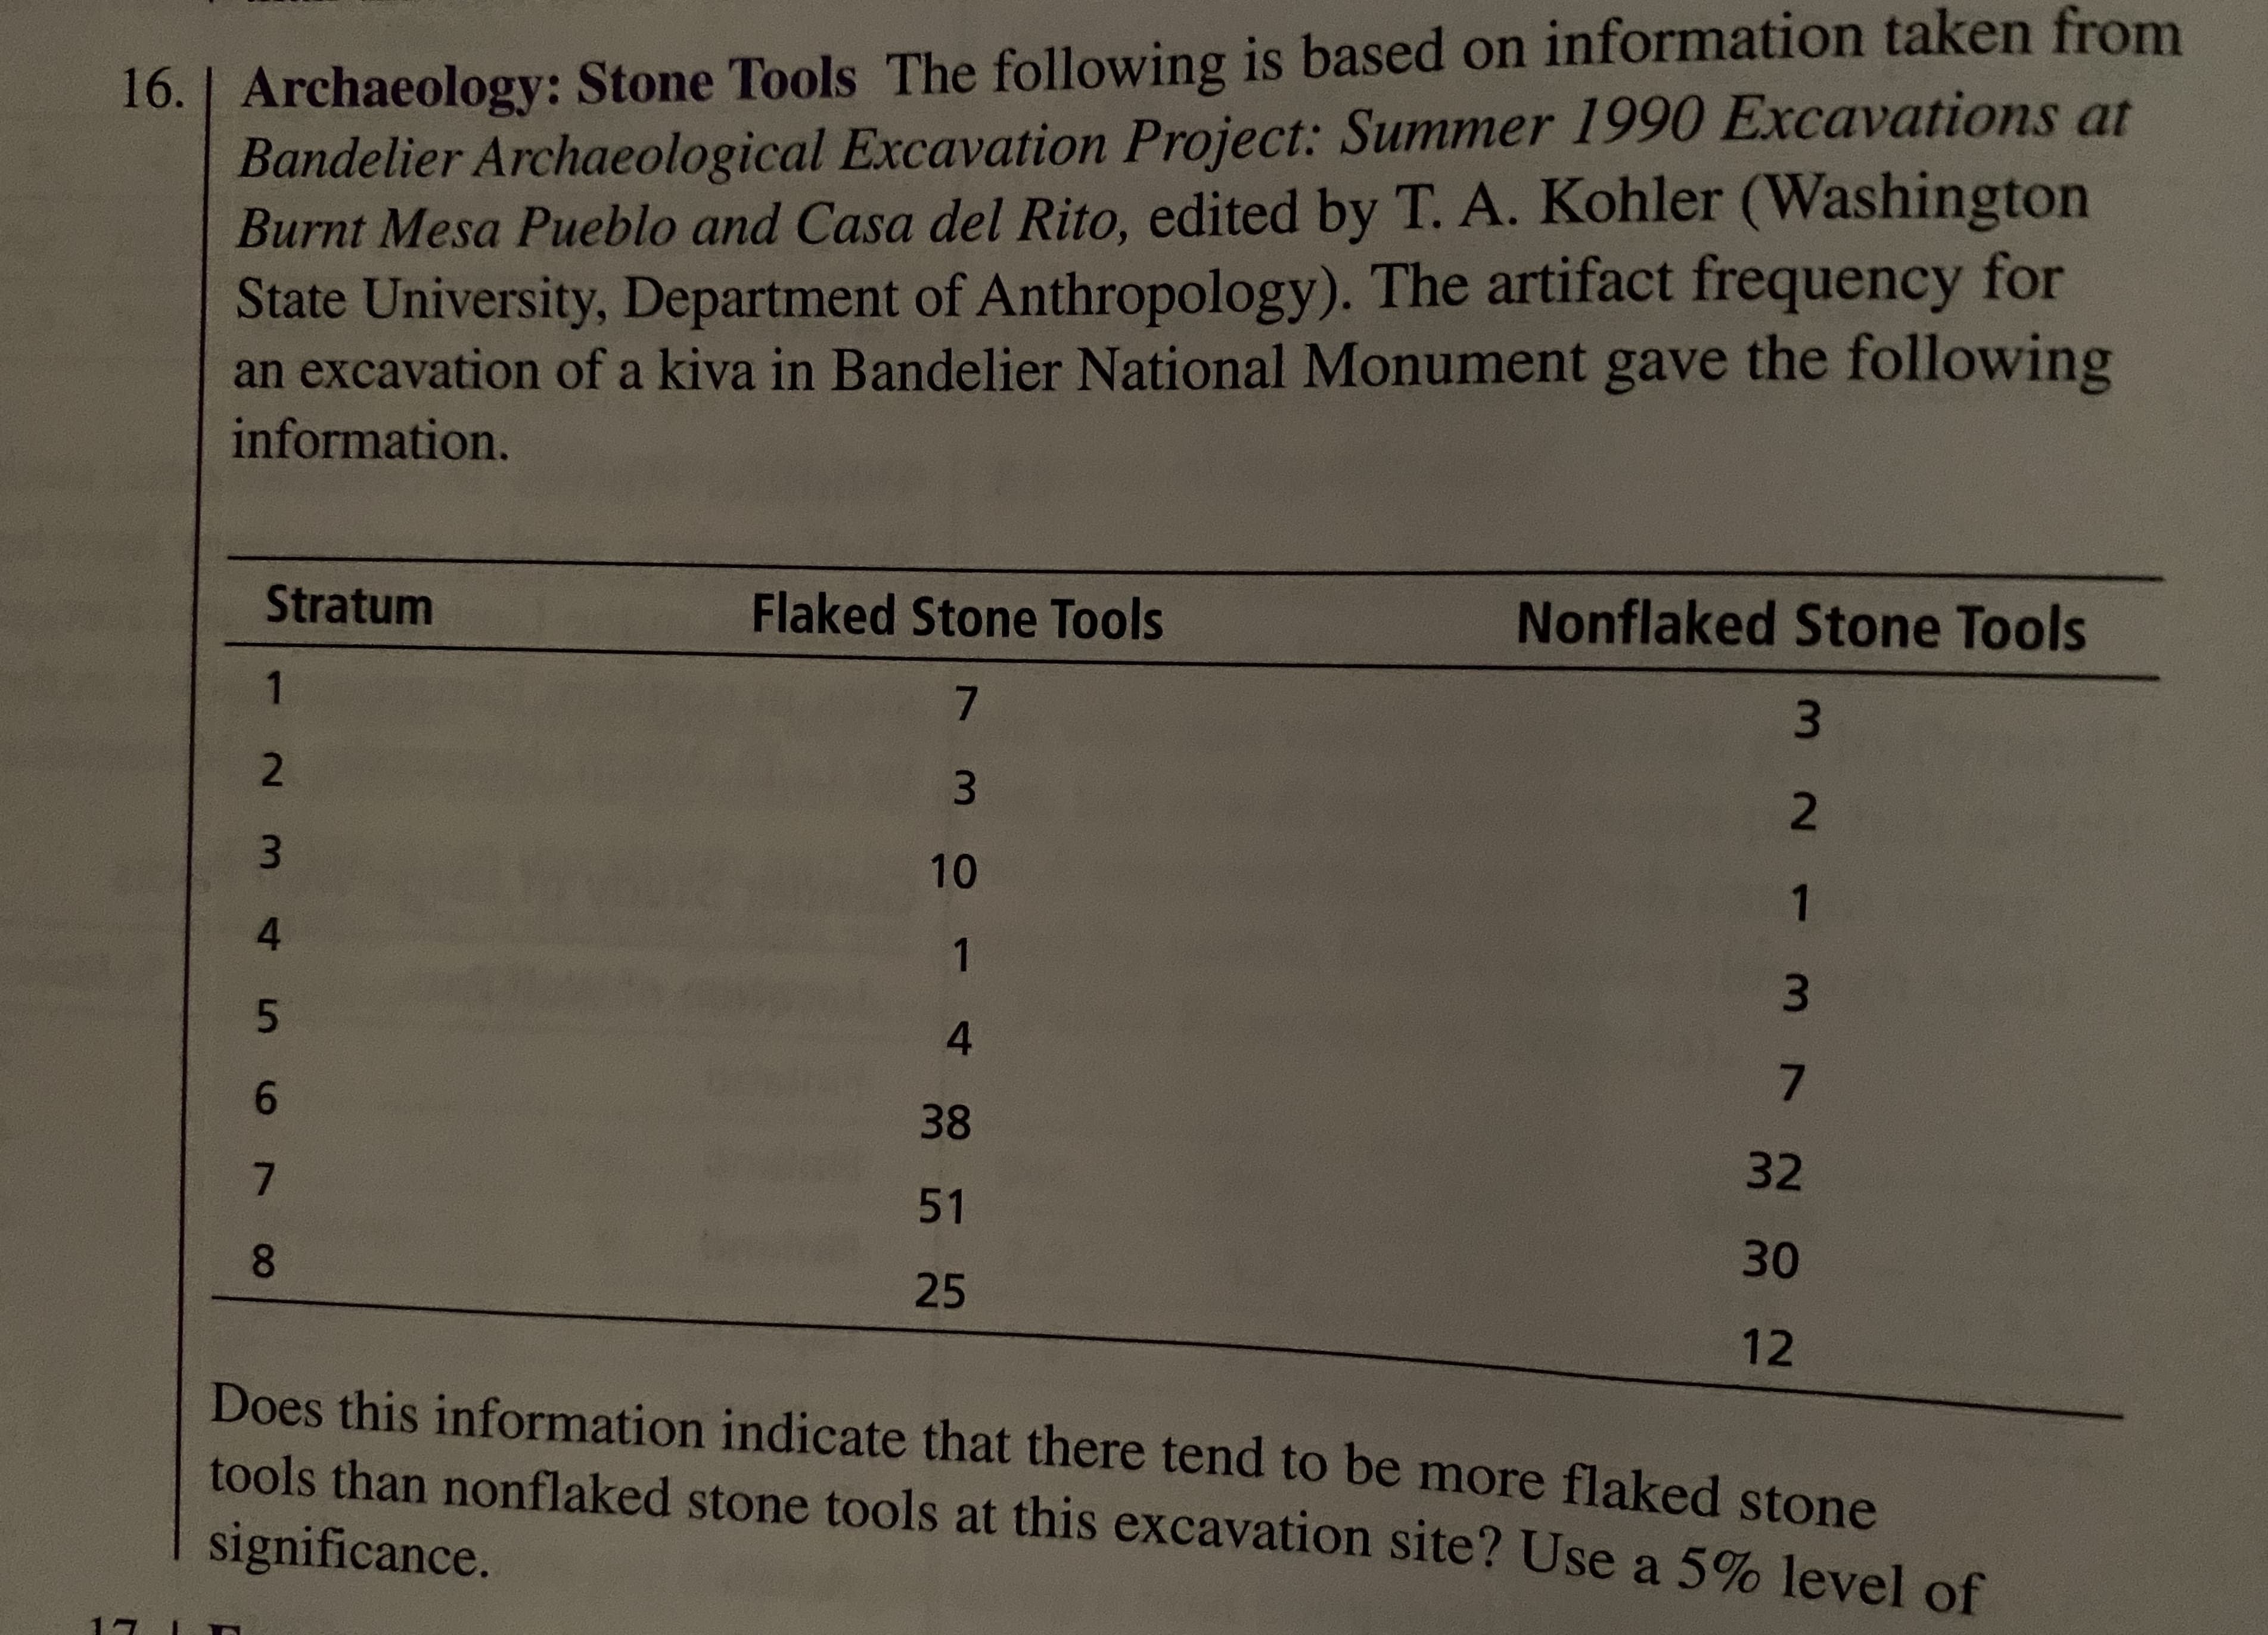 Archaeology: Stone Tools The following is based on information taken from
Bandelier Archaeological Excavation Project: Summer 1990 Excavations at
Burnt Mesa Pueblo and Casa del Rito, edited by T. A. Kohler (Washington
State University, Department of Anthropology). The artifact frequency for
an excavation of a kiva in Bandelier National Monument gave the following
16.
information.
Stratum
Flaked Stone Tools
Nonflaked Stone Tools
7
2.
2.
3.
10
1
4.
1
4.
7
6.
38
32
7.
51
30
8.
25
12
Does this information indicate that there tend to be more flaked stone
tools than nonflaked stone tools at this excavation site? Use a 5% level of
significance.
1,
